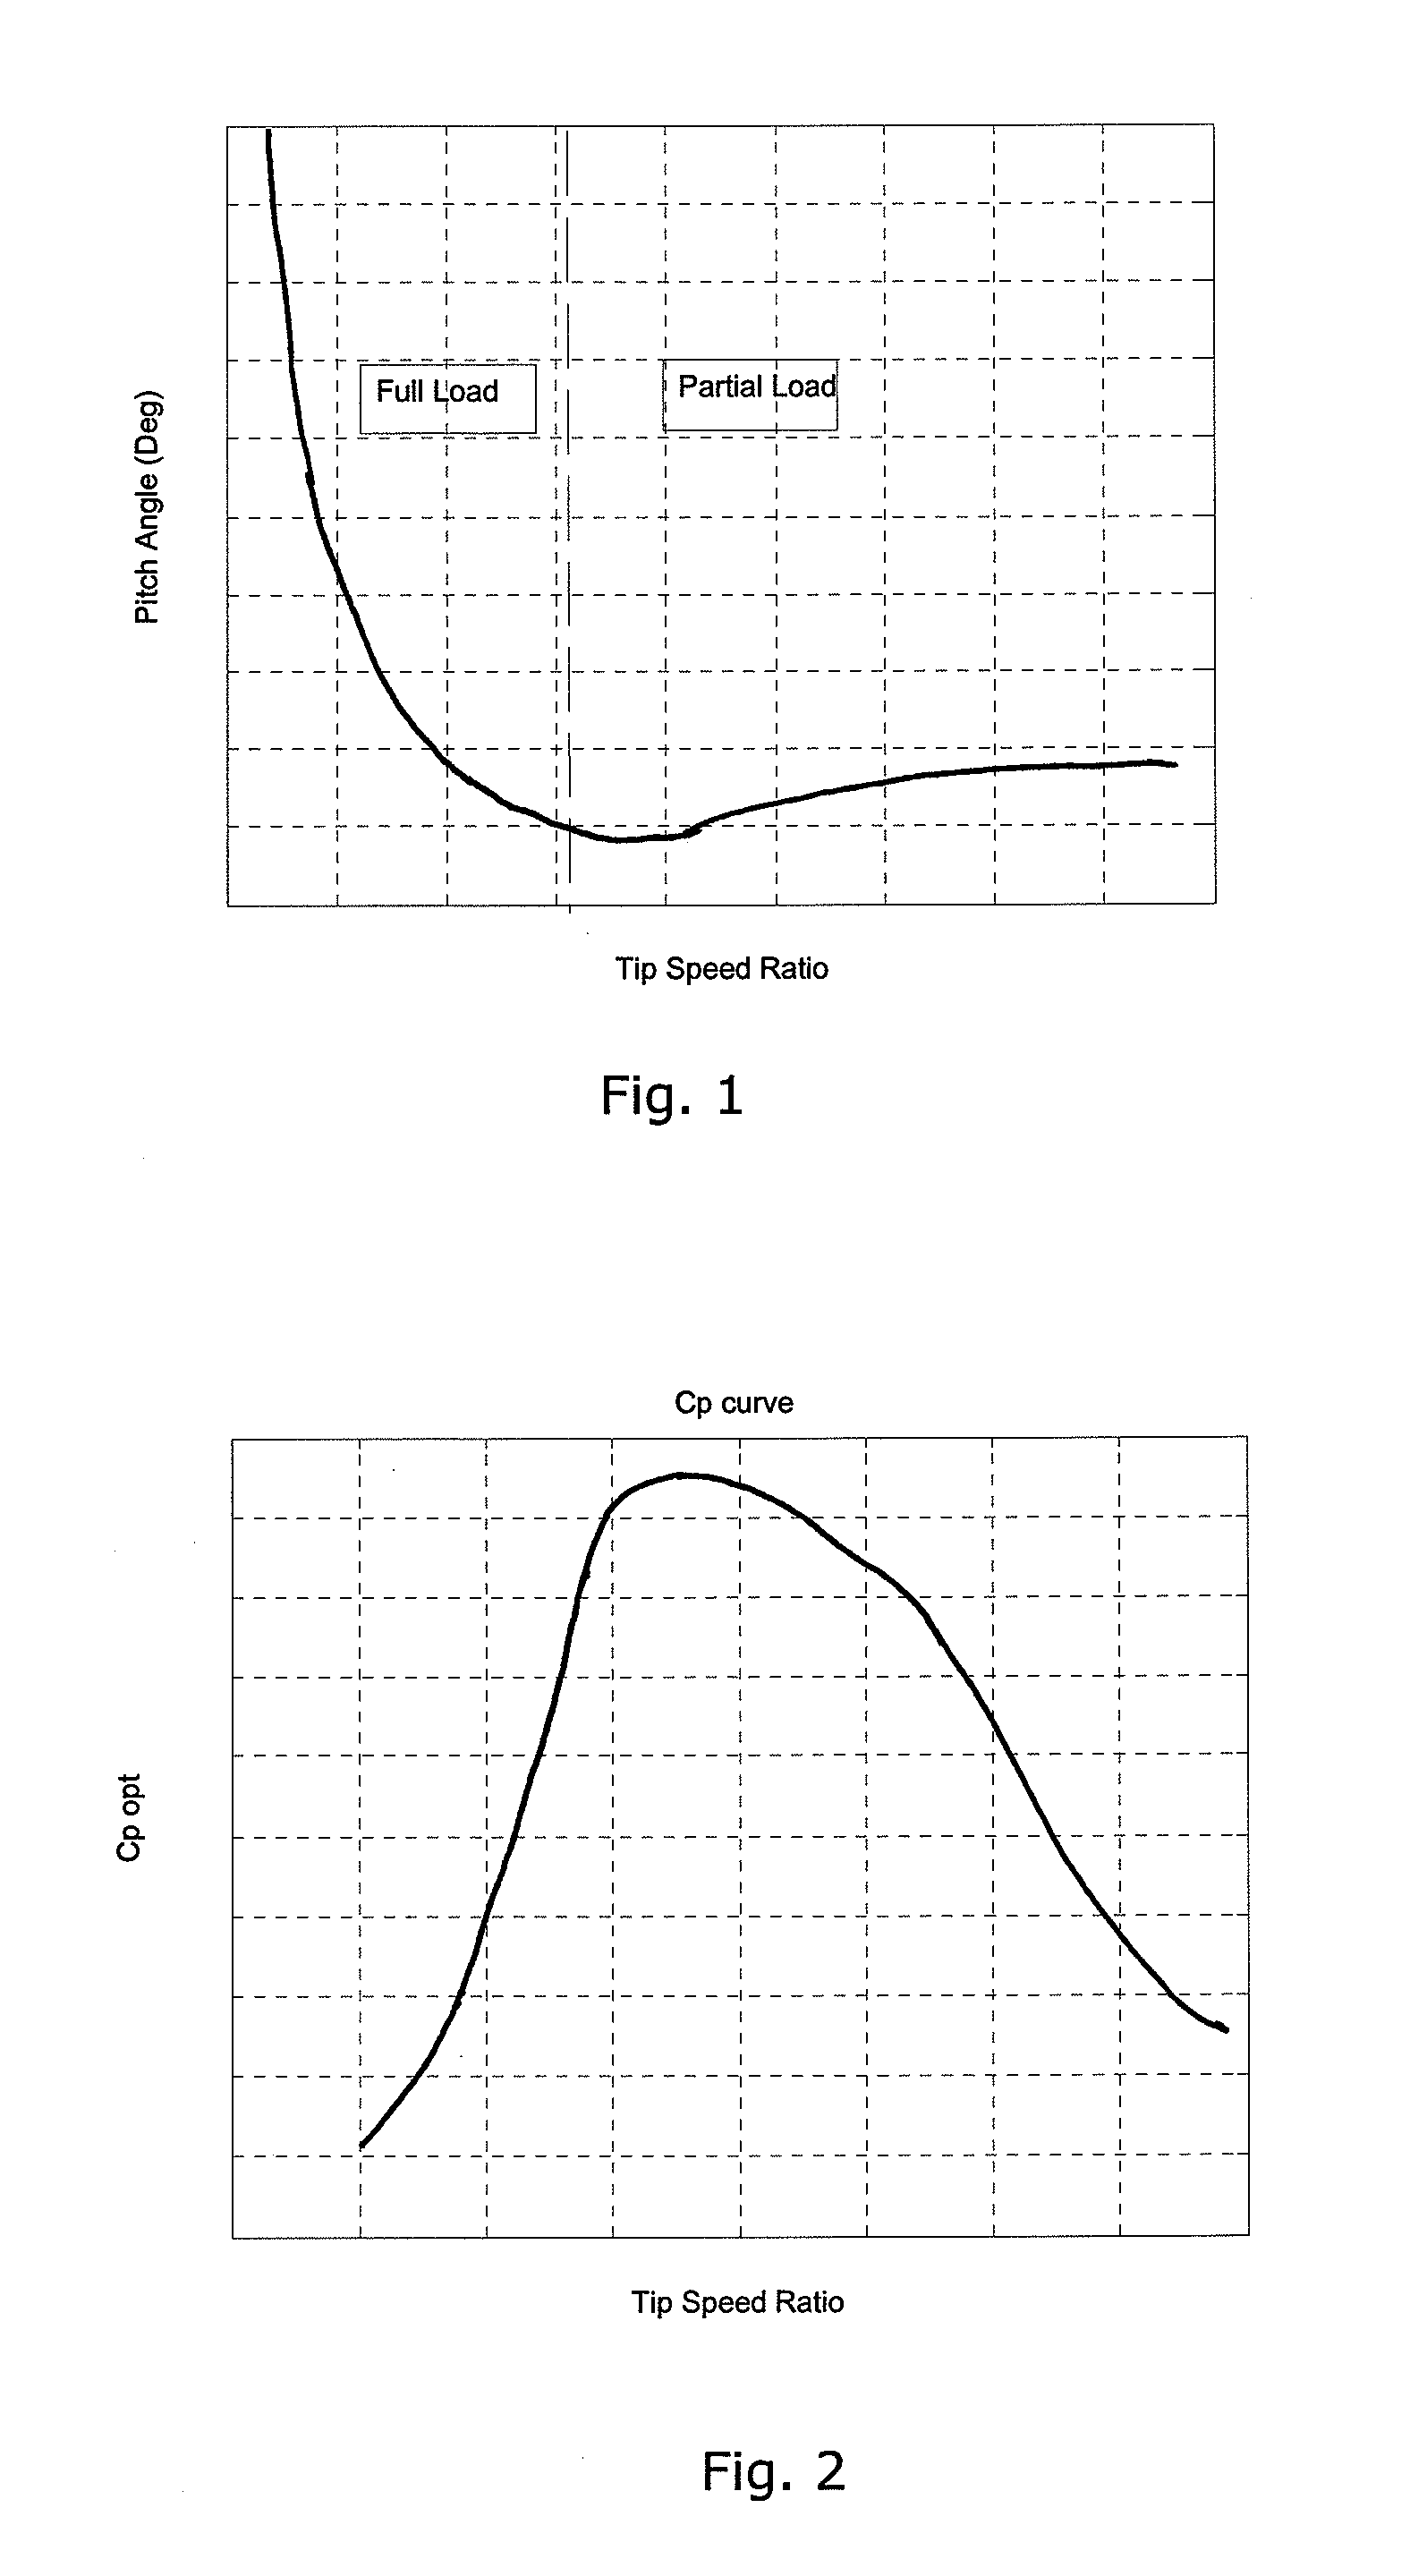 Method for operating a wind turbine at improved power output